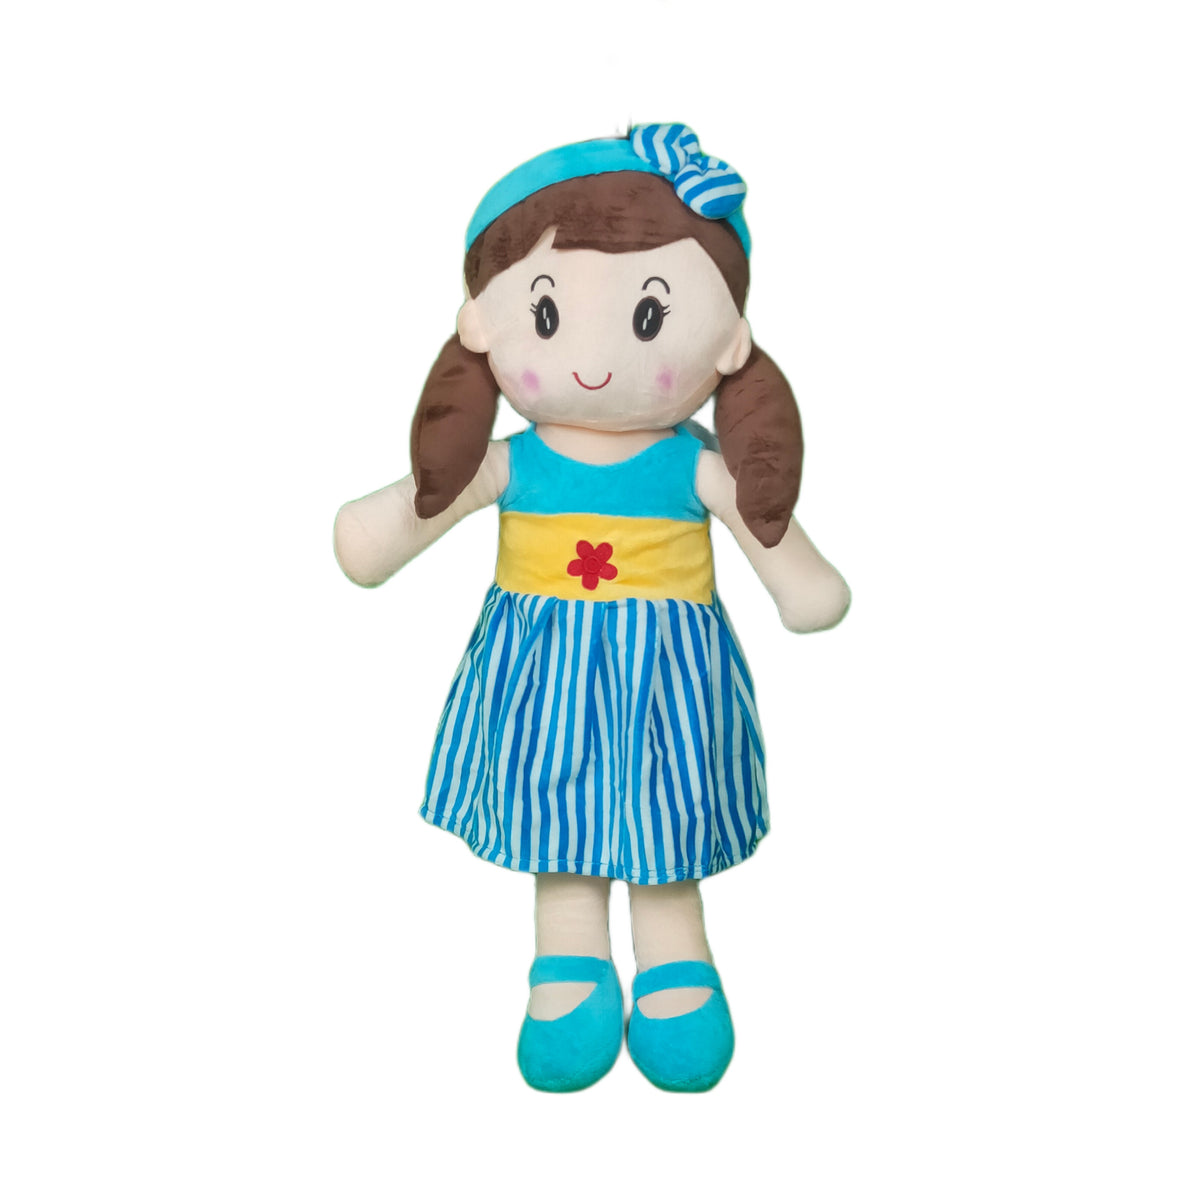 Play Hour Cute Rag Doll Plush Soft Toy Wearing Blue & White Stripes Frock for Ages 3 Years and Up, 60cm